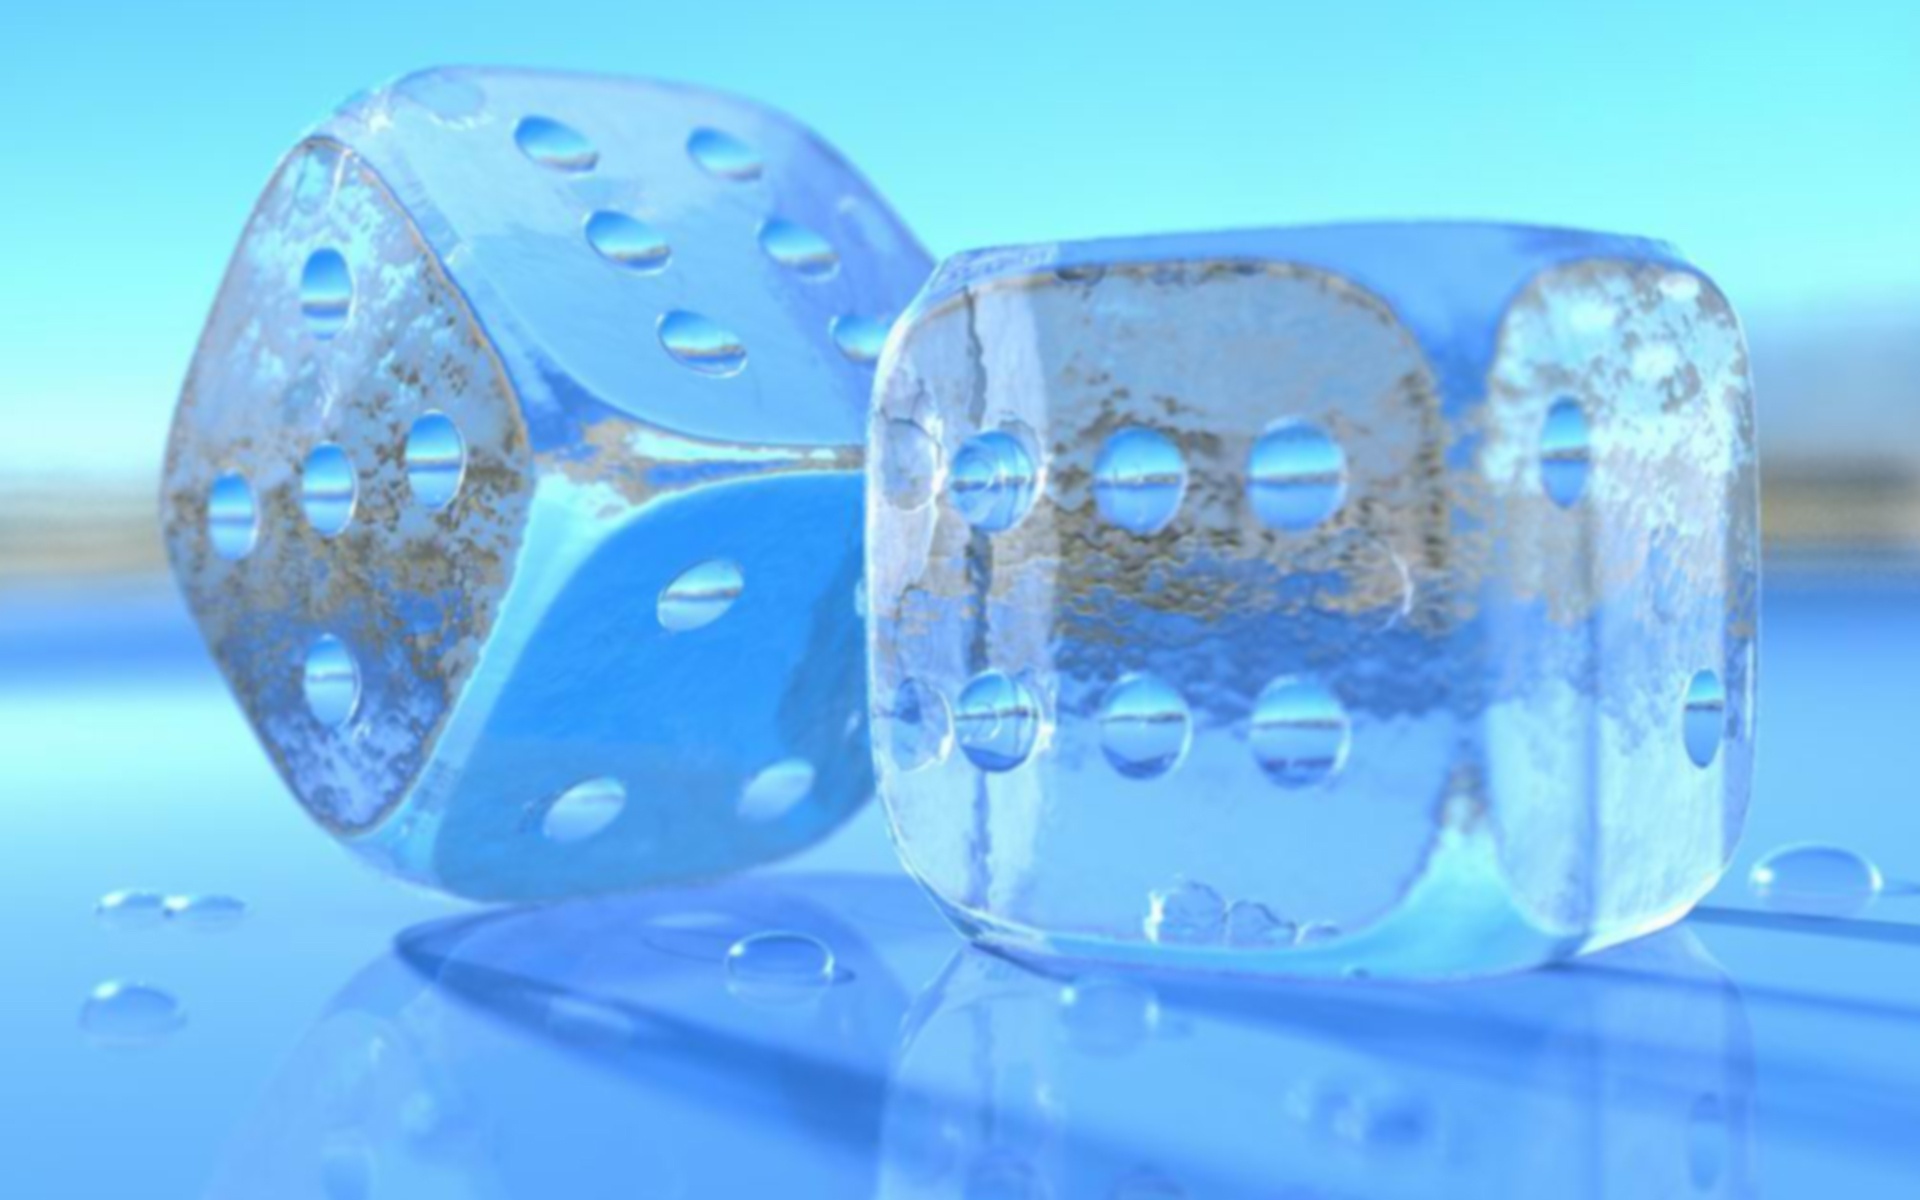 Ice dice Wallpapers Ice dice Backgrounds Ice dice Free HD Wallpapers